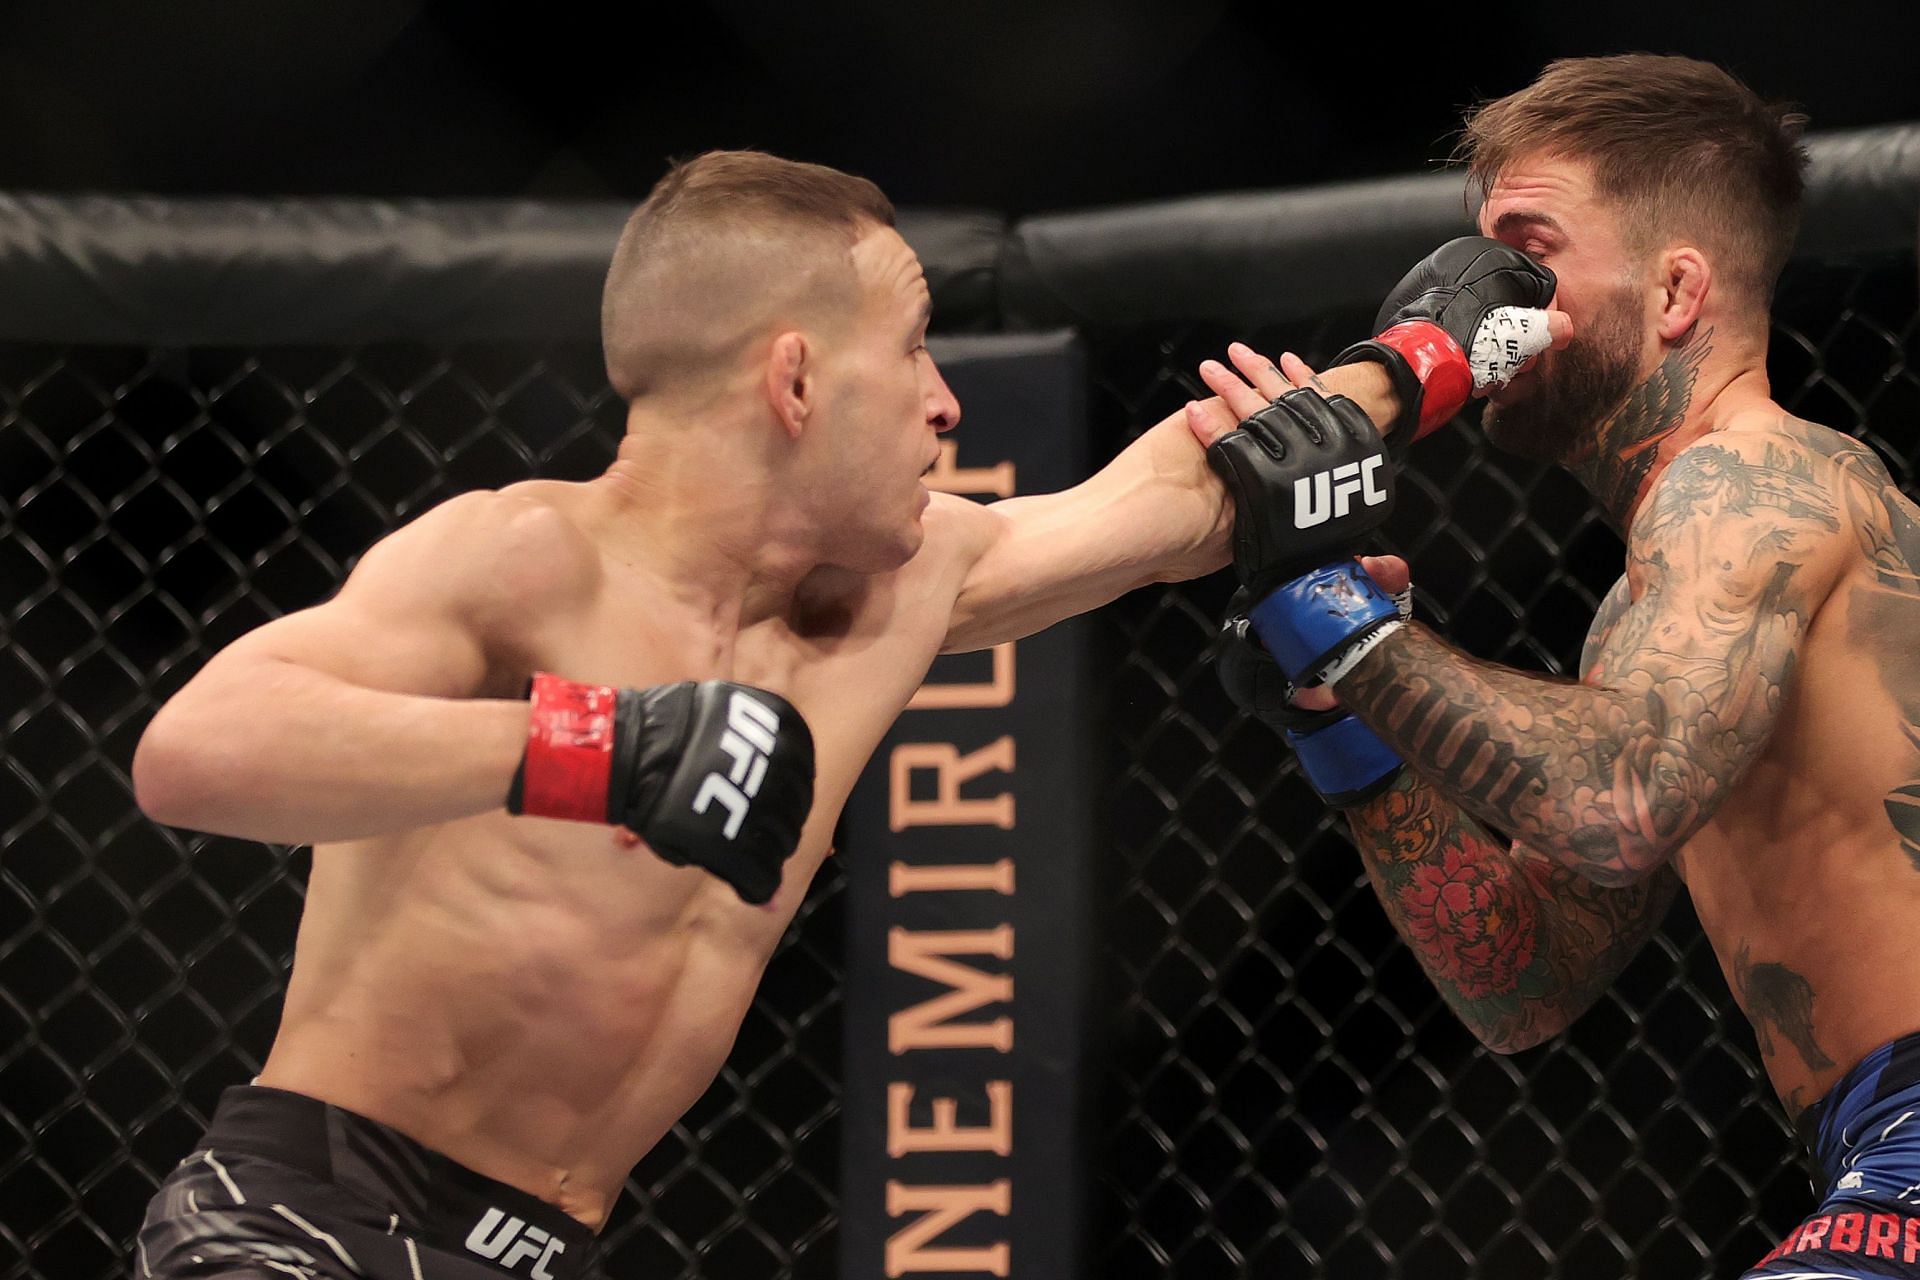 Kai Kara-France welcomed Cody Garbrandt to the UFC flyweight division in vicious fashion.